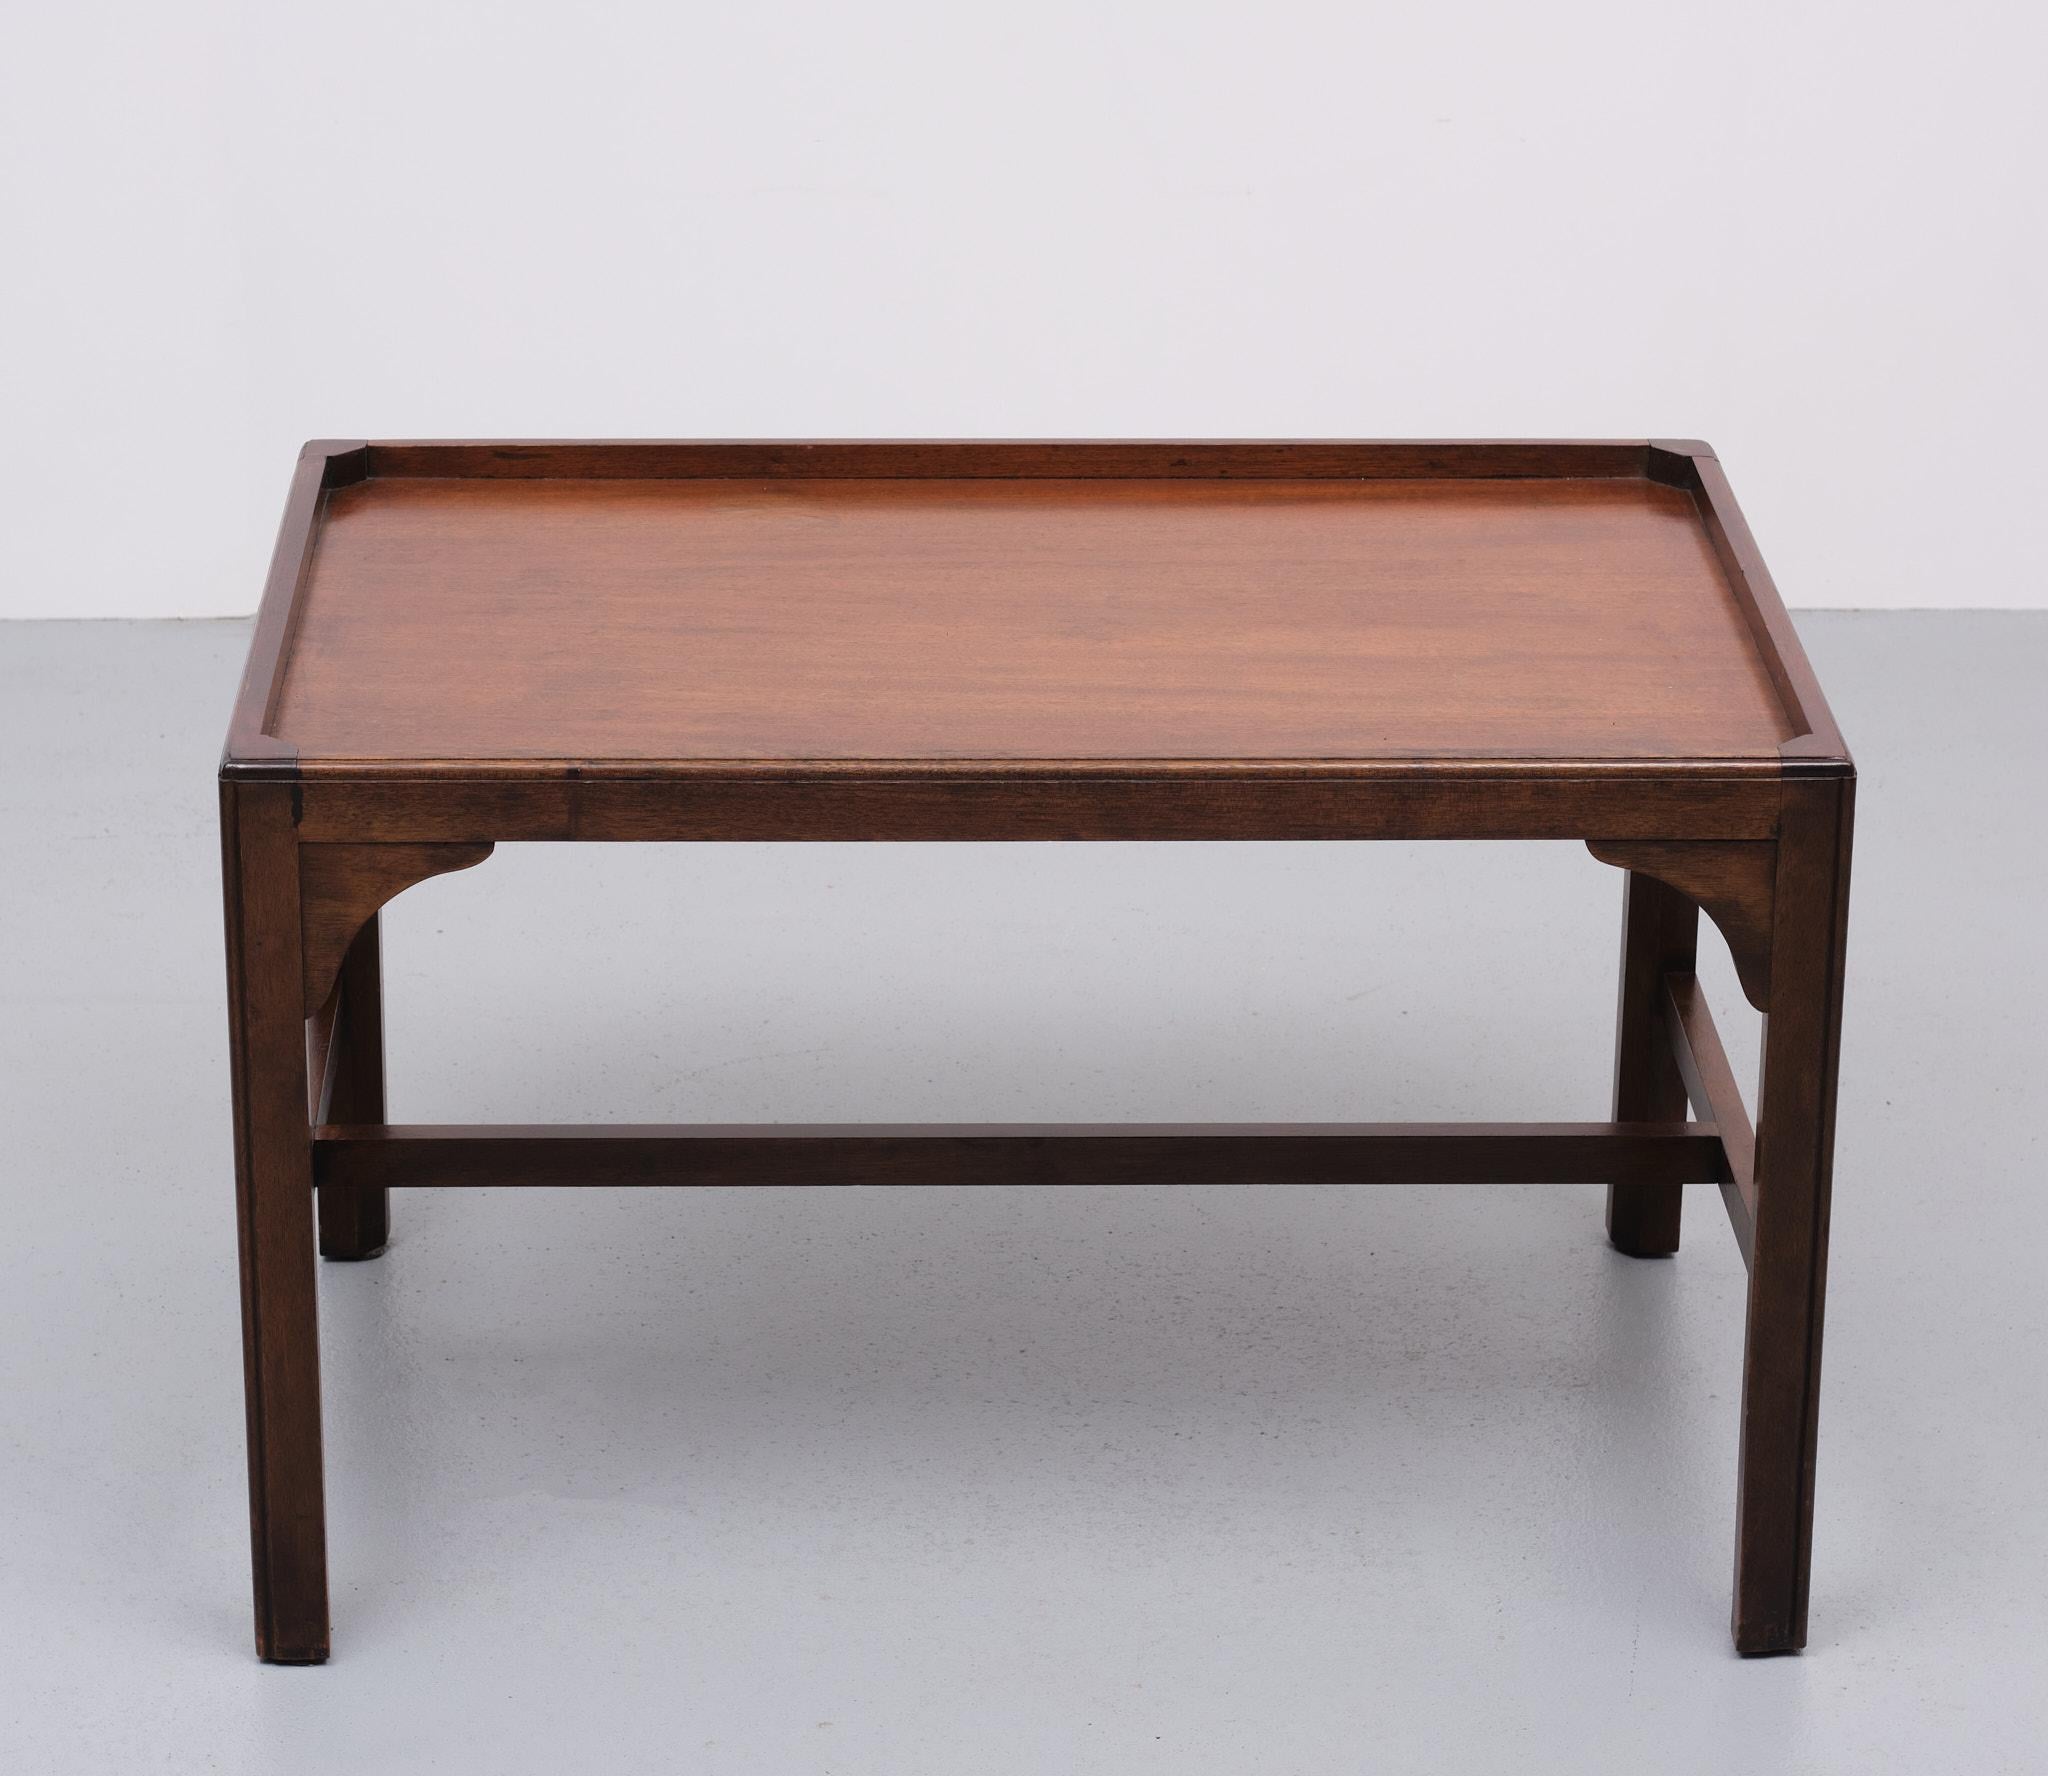 Mid-20th Century Mahogany Tray Table Bevan Funnell 1960s England  For Sale